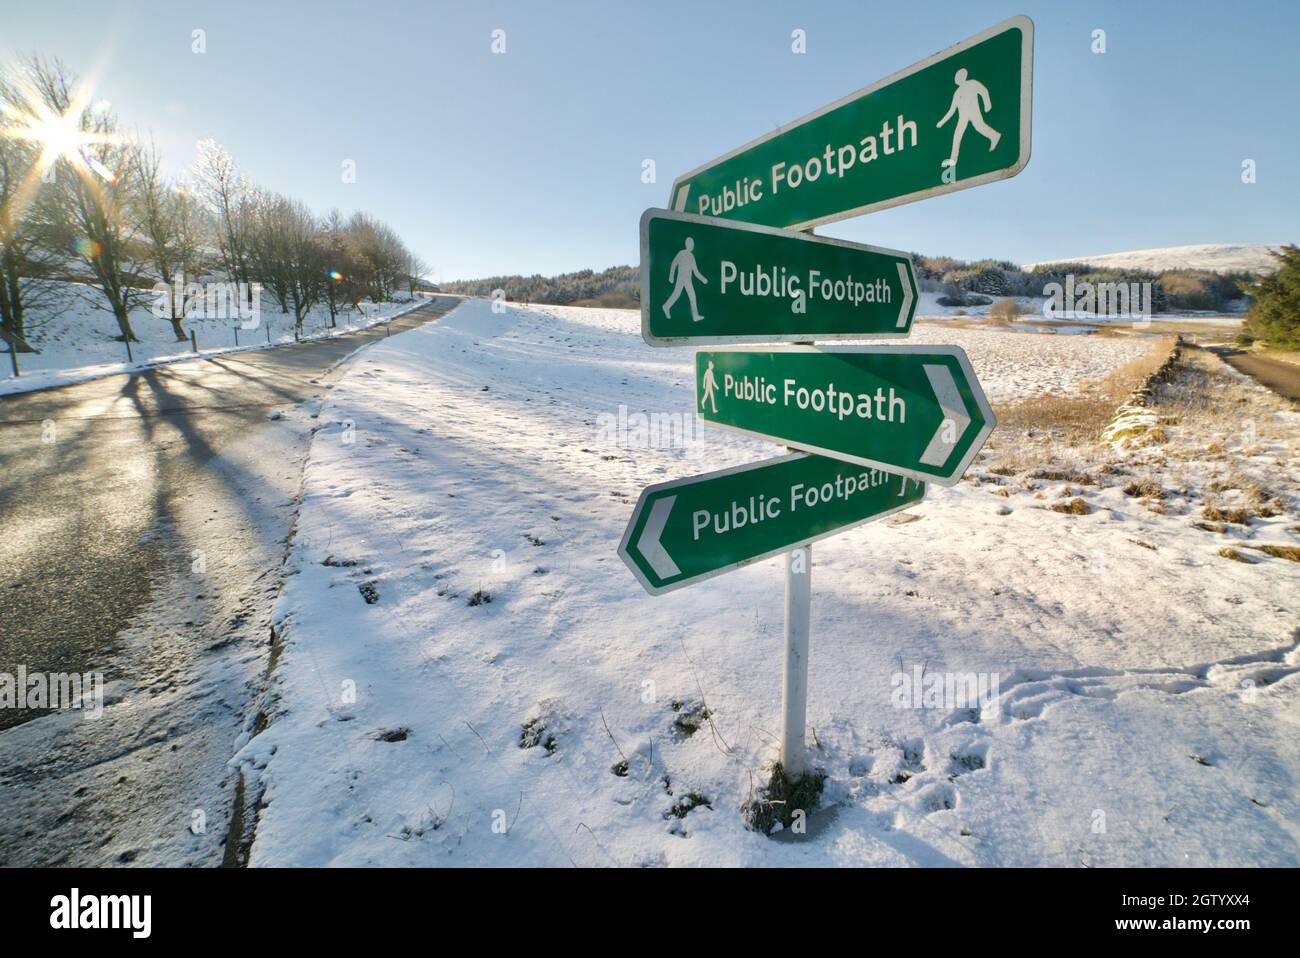 Multiple sign posts for public footpaths in England, public footpath sign, multiple paths, lots of paths, different options. Stock Photo